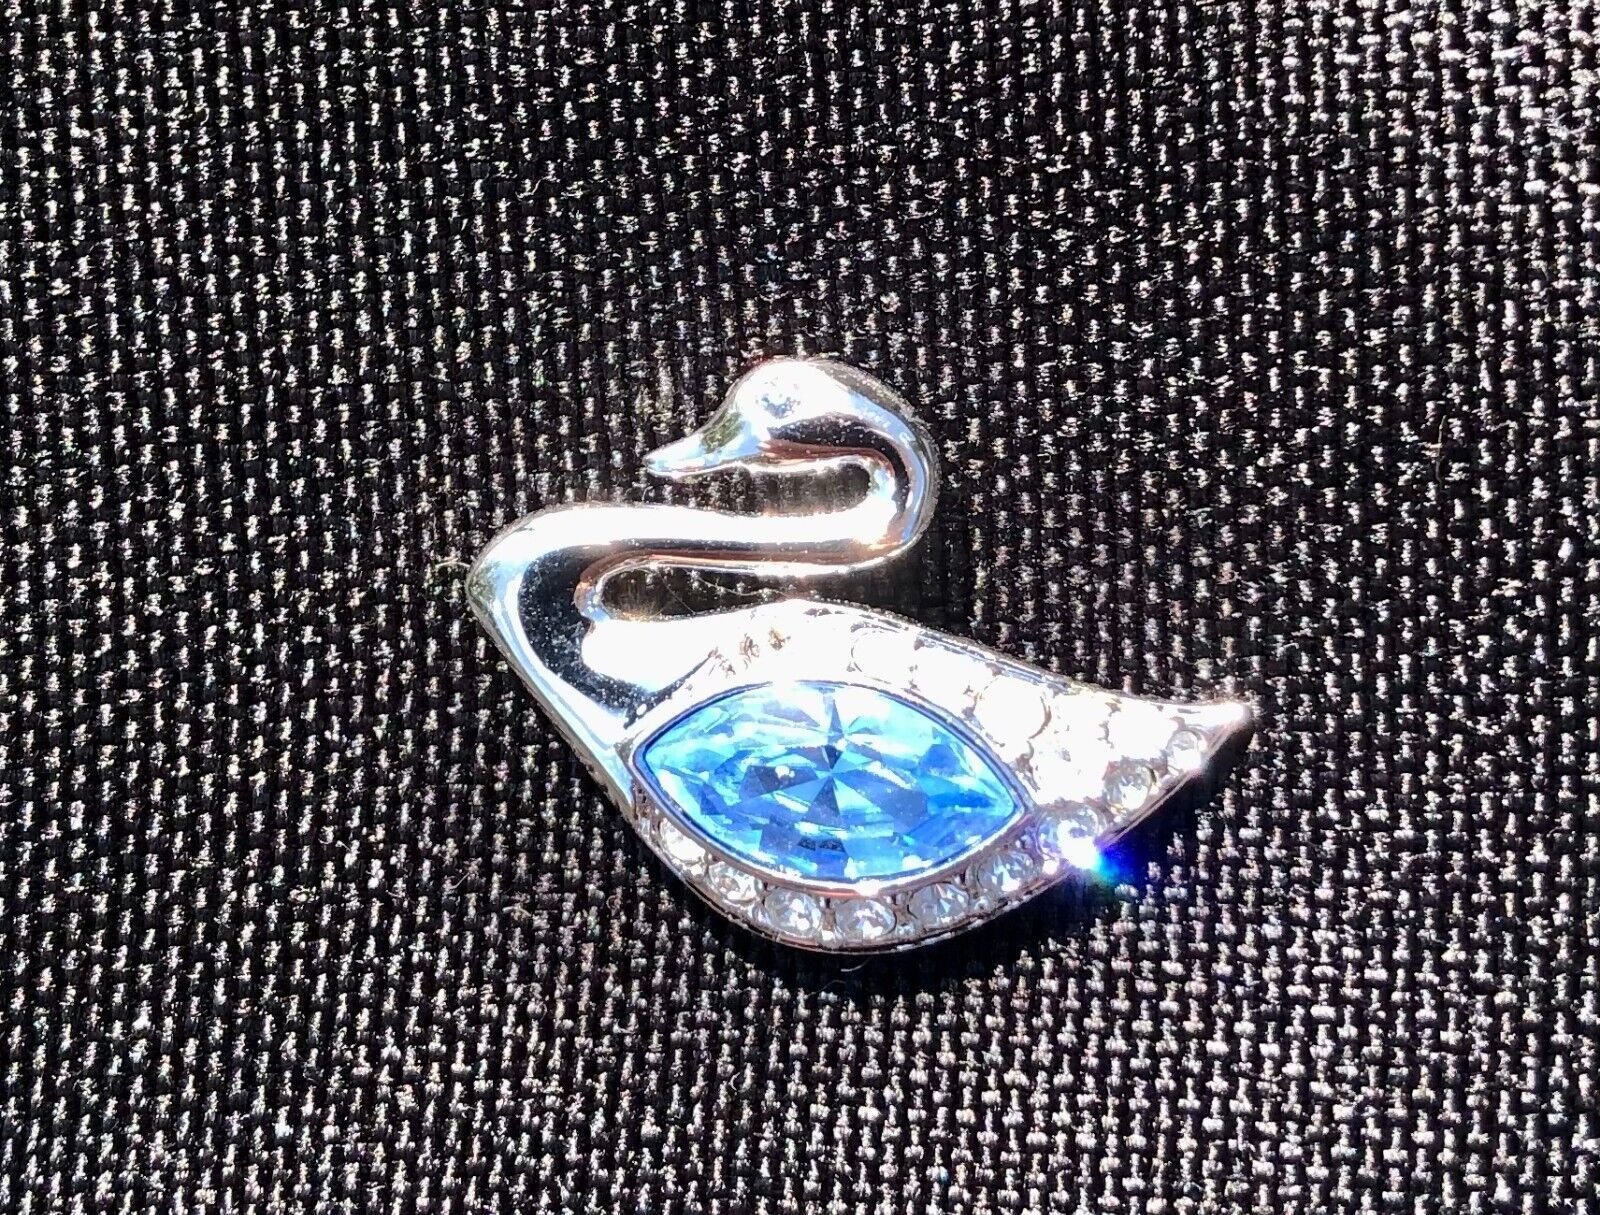 Swarovski Silver Swan Pin With Blue Crystal Pave New Tie Tack style - $20.00